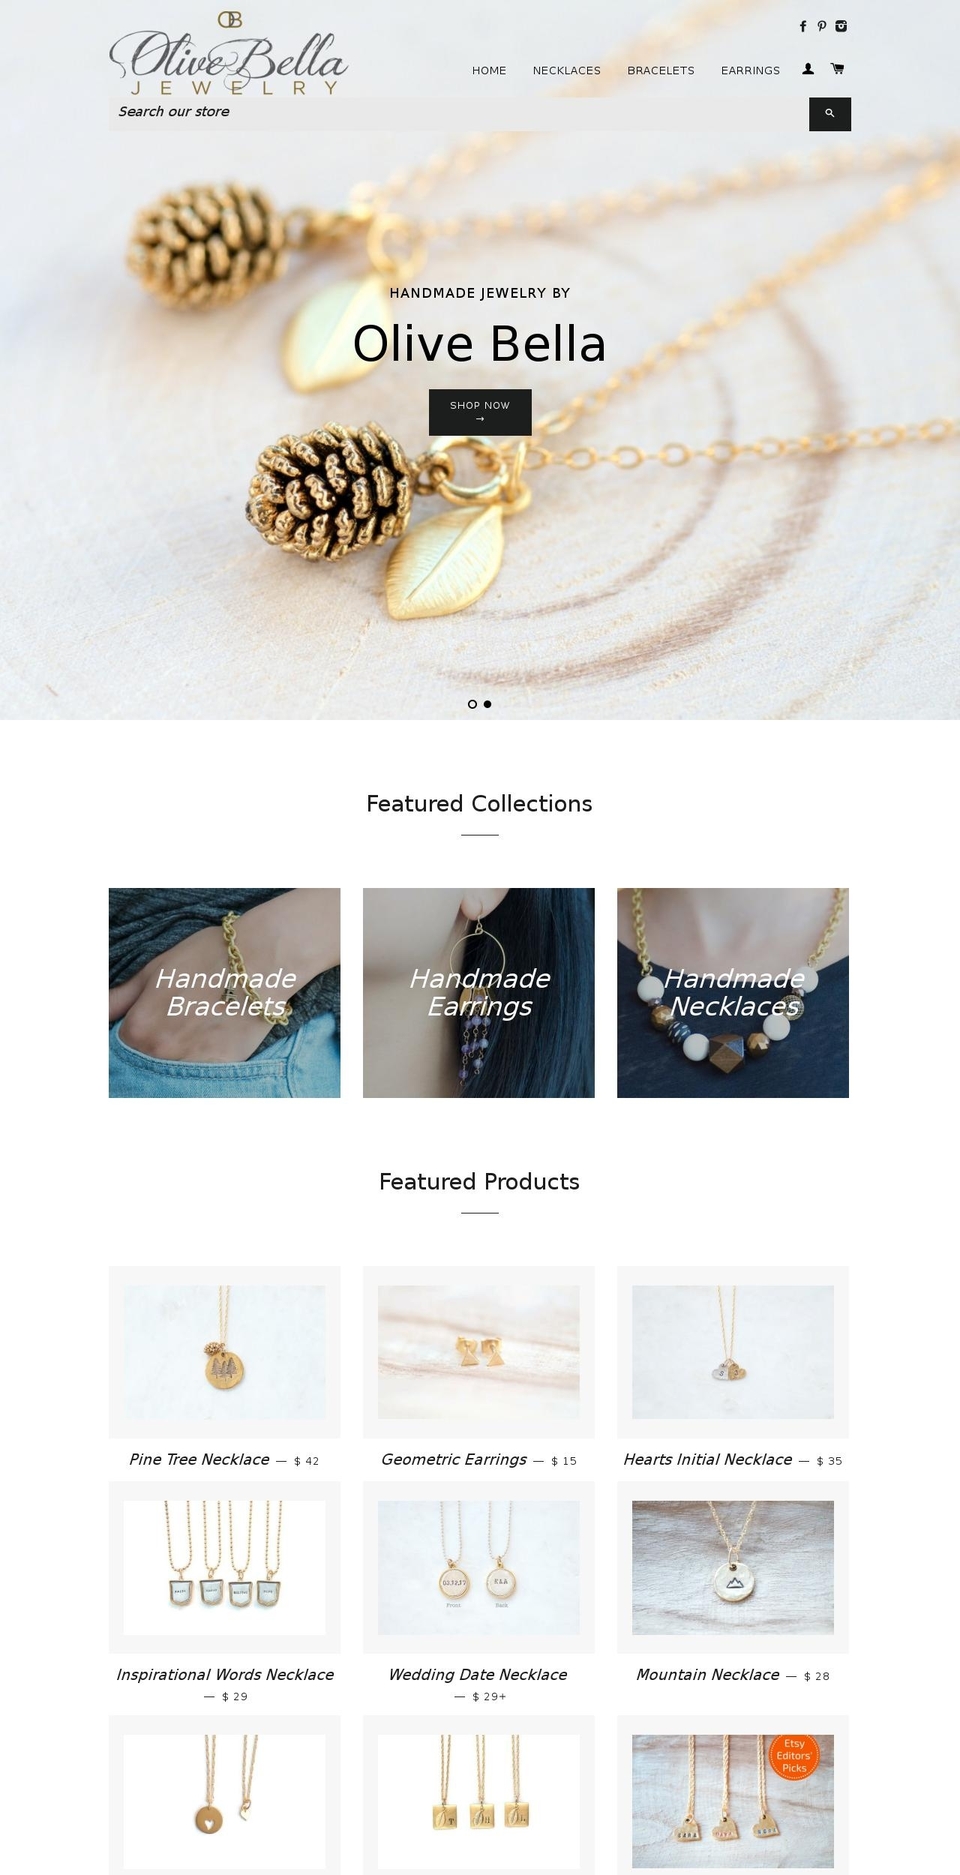 Editions Shopify theme site example olivebella.com